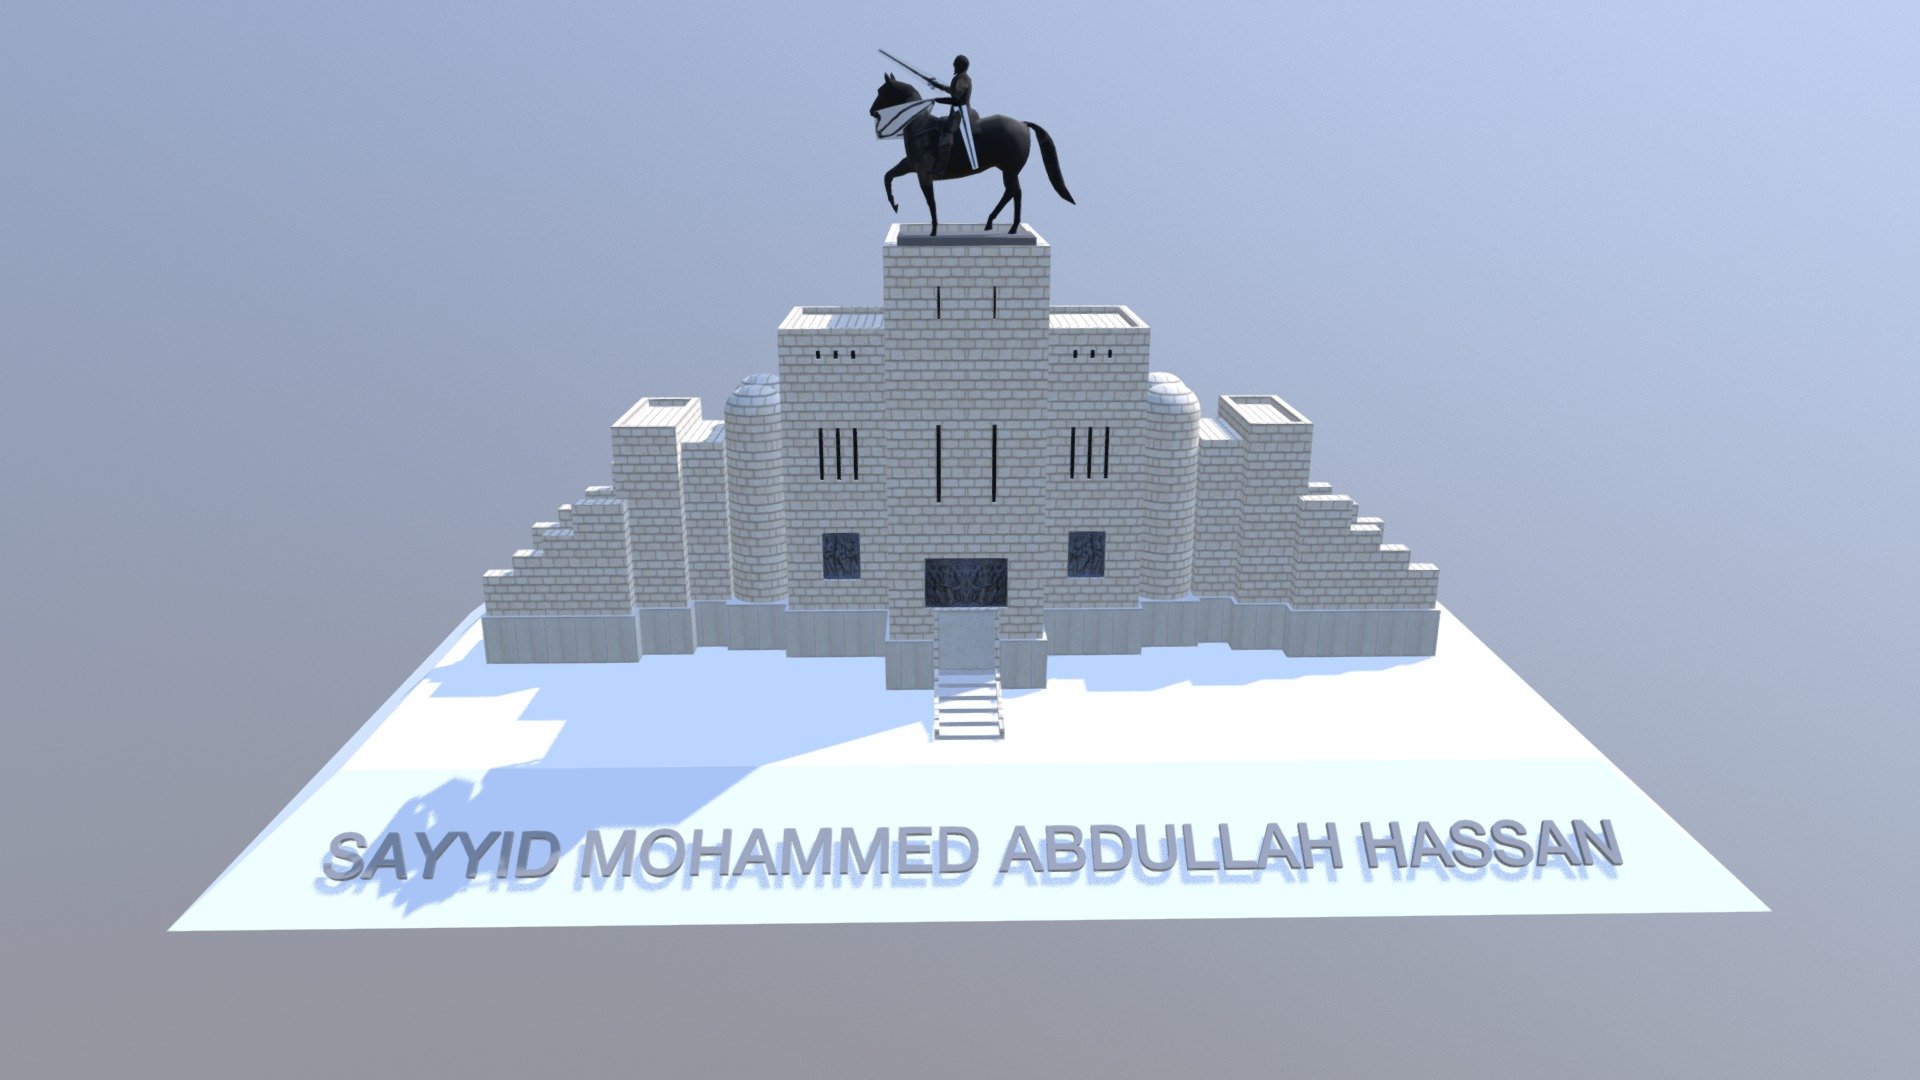 Statue Sayyid Mohammed Abdullah Hassan 3d Model By Somaliarchitecture E34c33f Sketchfab 